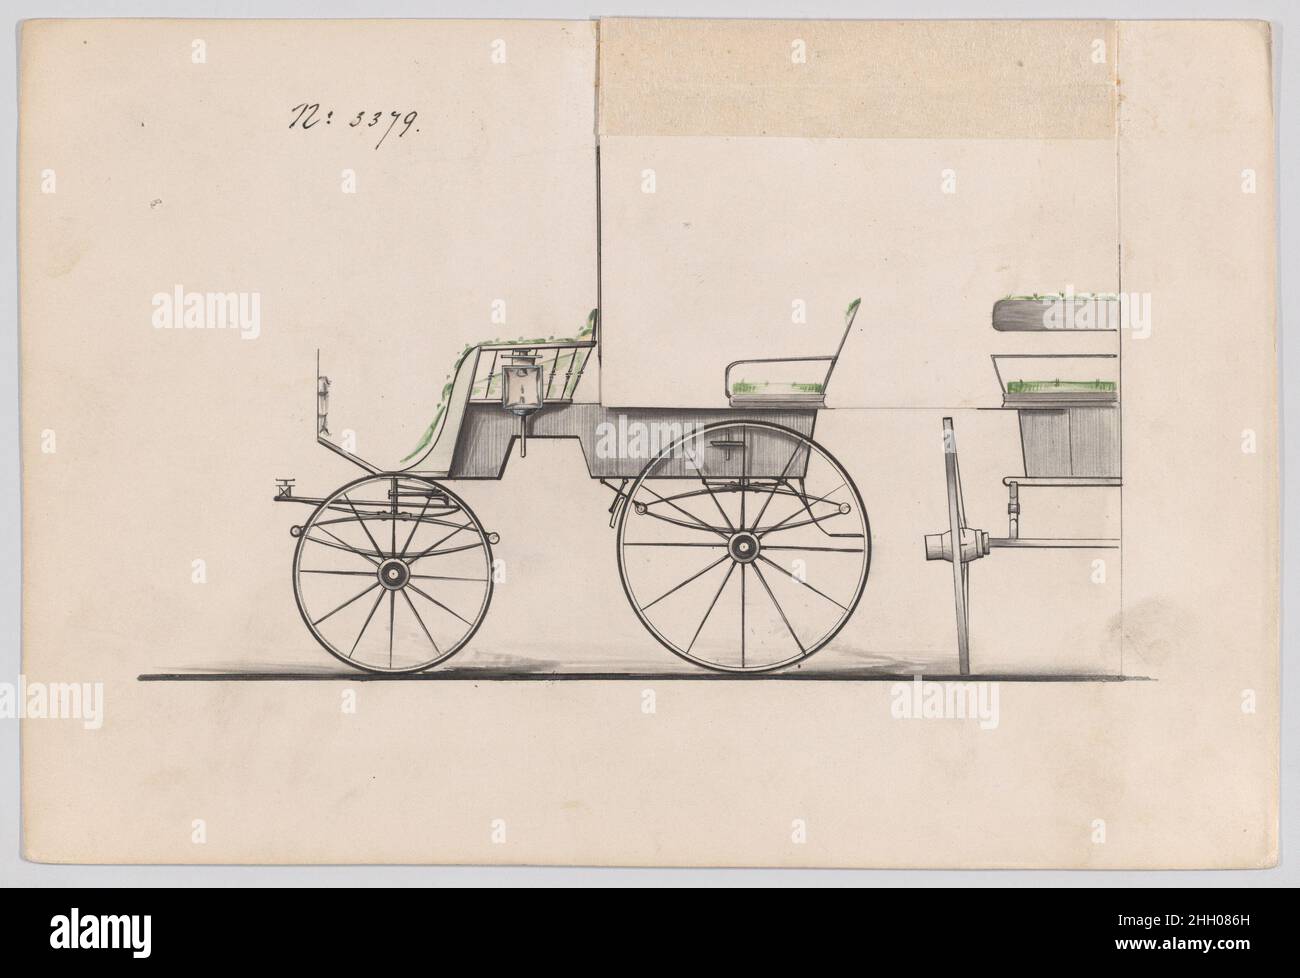 Design for T-Cart, no. 3379 1877 Brewster & Co. American Brewster & Company HistoryEstablished in 1810 by James Brewster (1788–1866) in New Haven, Connecticut, Brewster & Company, specialized in the manufacture of fine carriages. The founder opened a New York showroom in 1827 at 53-54 Broad Street, and the company flourished under generations of family leadership. Expansion necessitated moves around lower Manhattan, with name changes reflecting shifts of management–James Brewster & Sons operated at 25 Canal Street, James Brewster Sons at 396 Broadway, and Brewster of Broome Street was based at Stock Photo